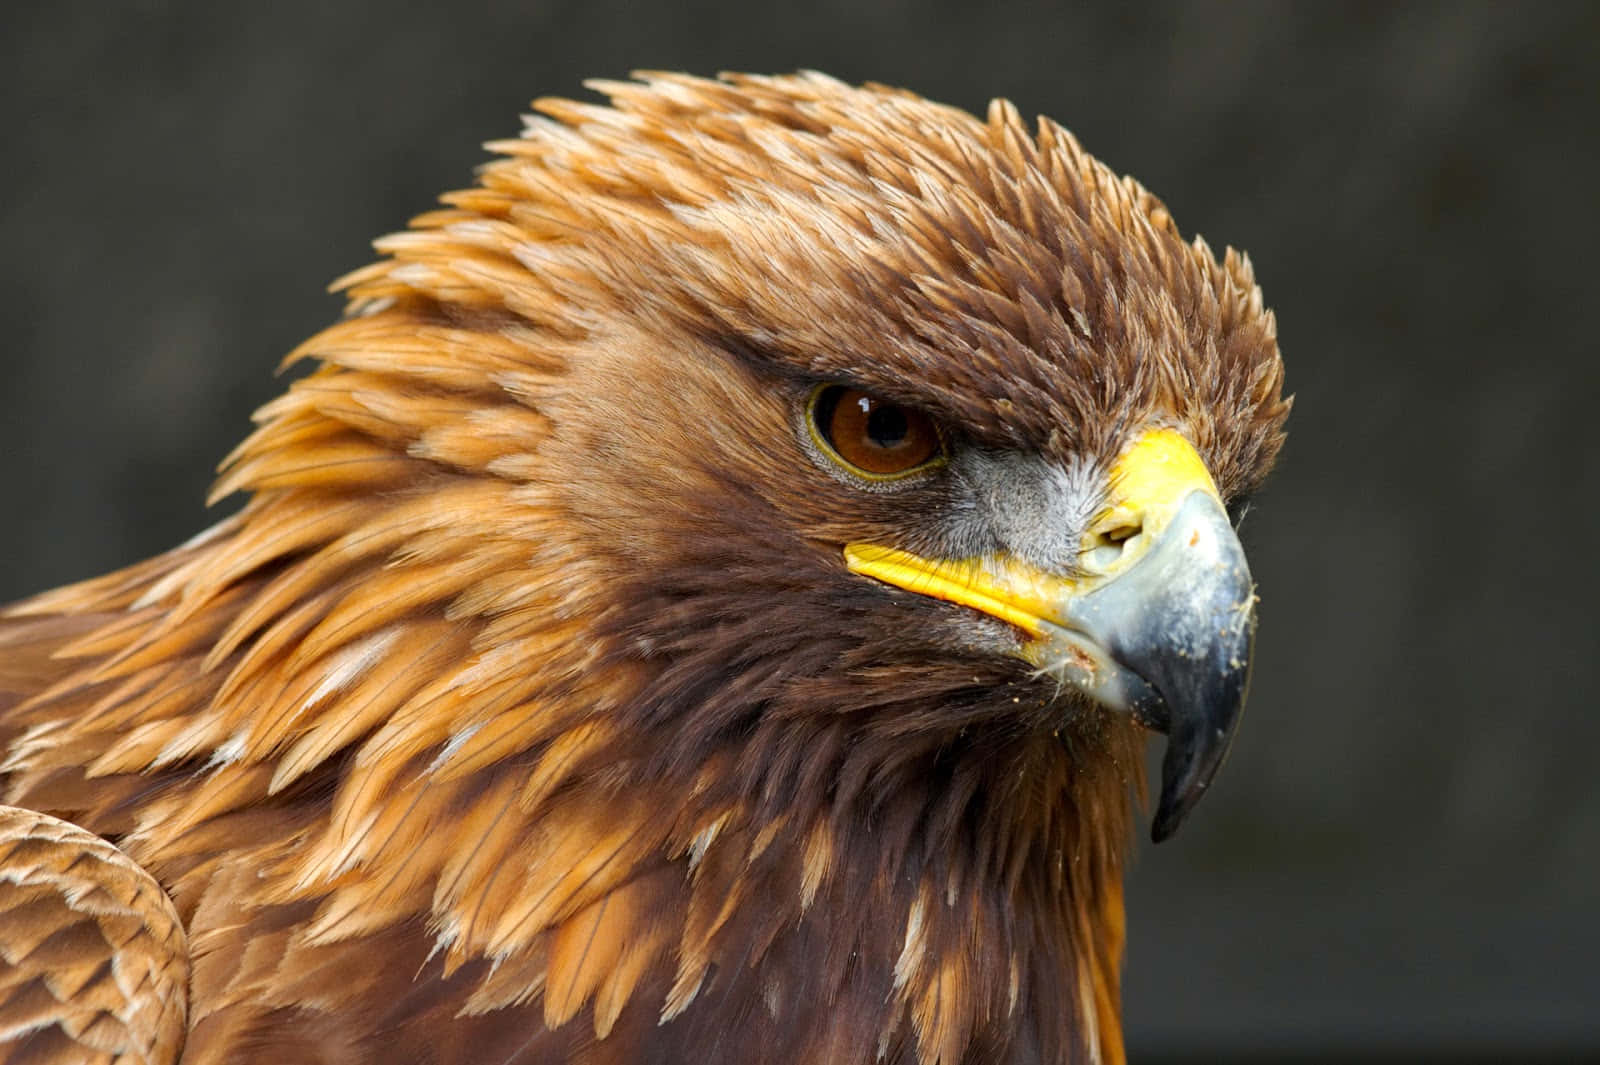 The Majestic Golden Eagle